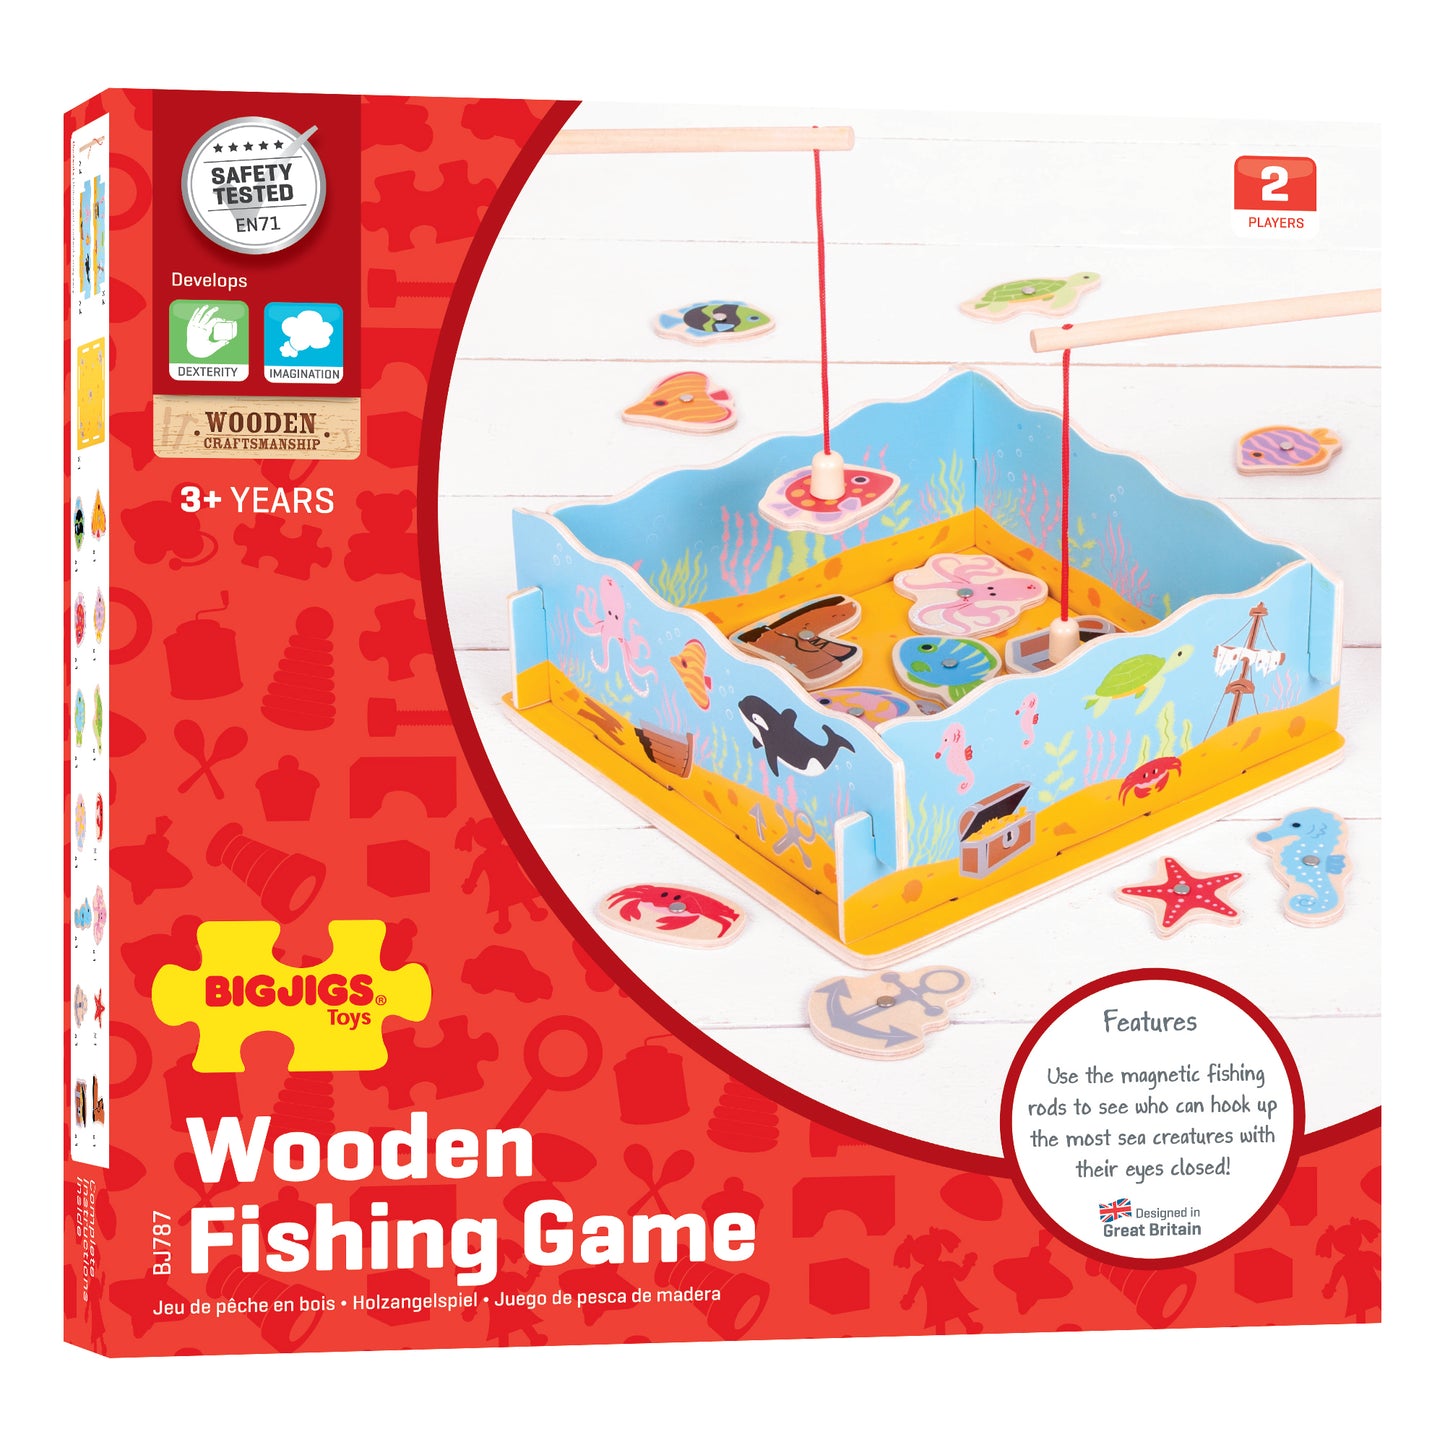 A magnet fishing game